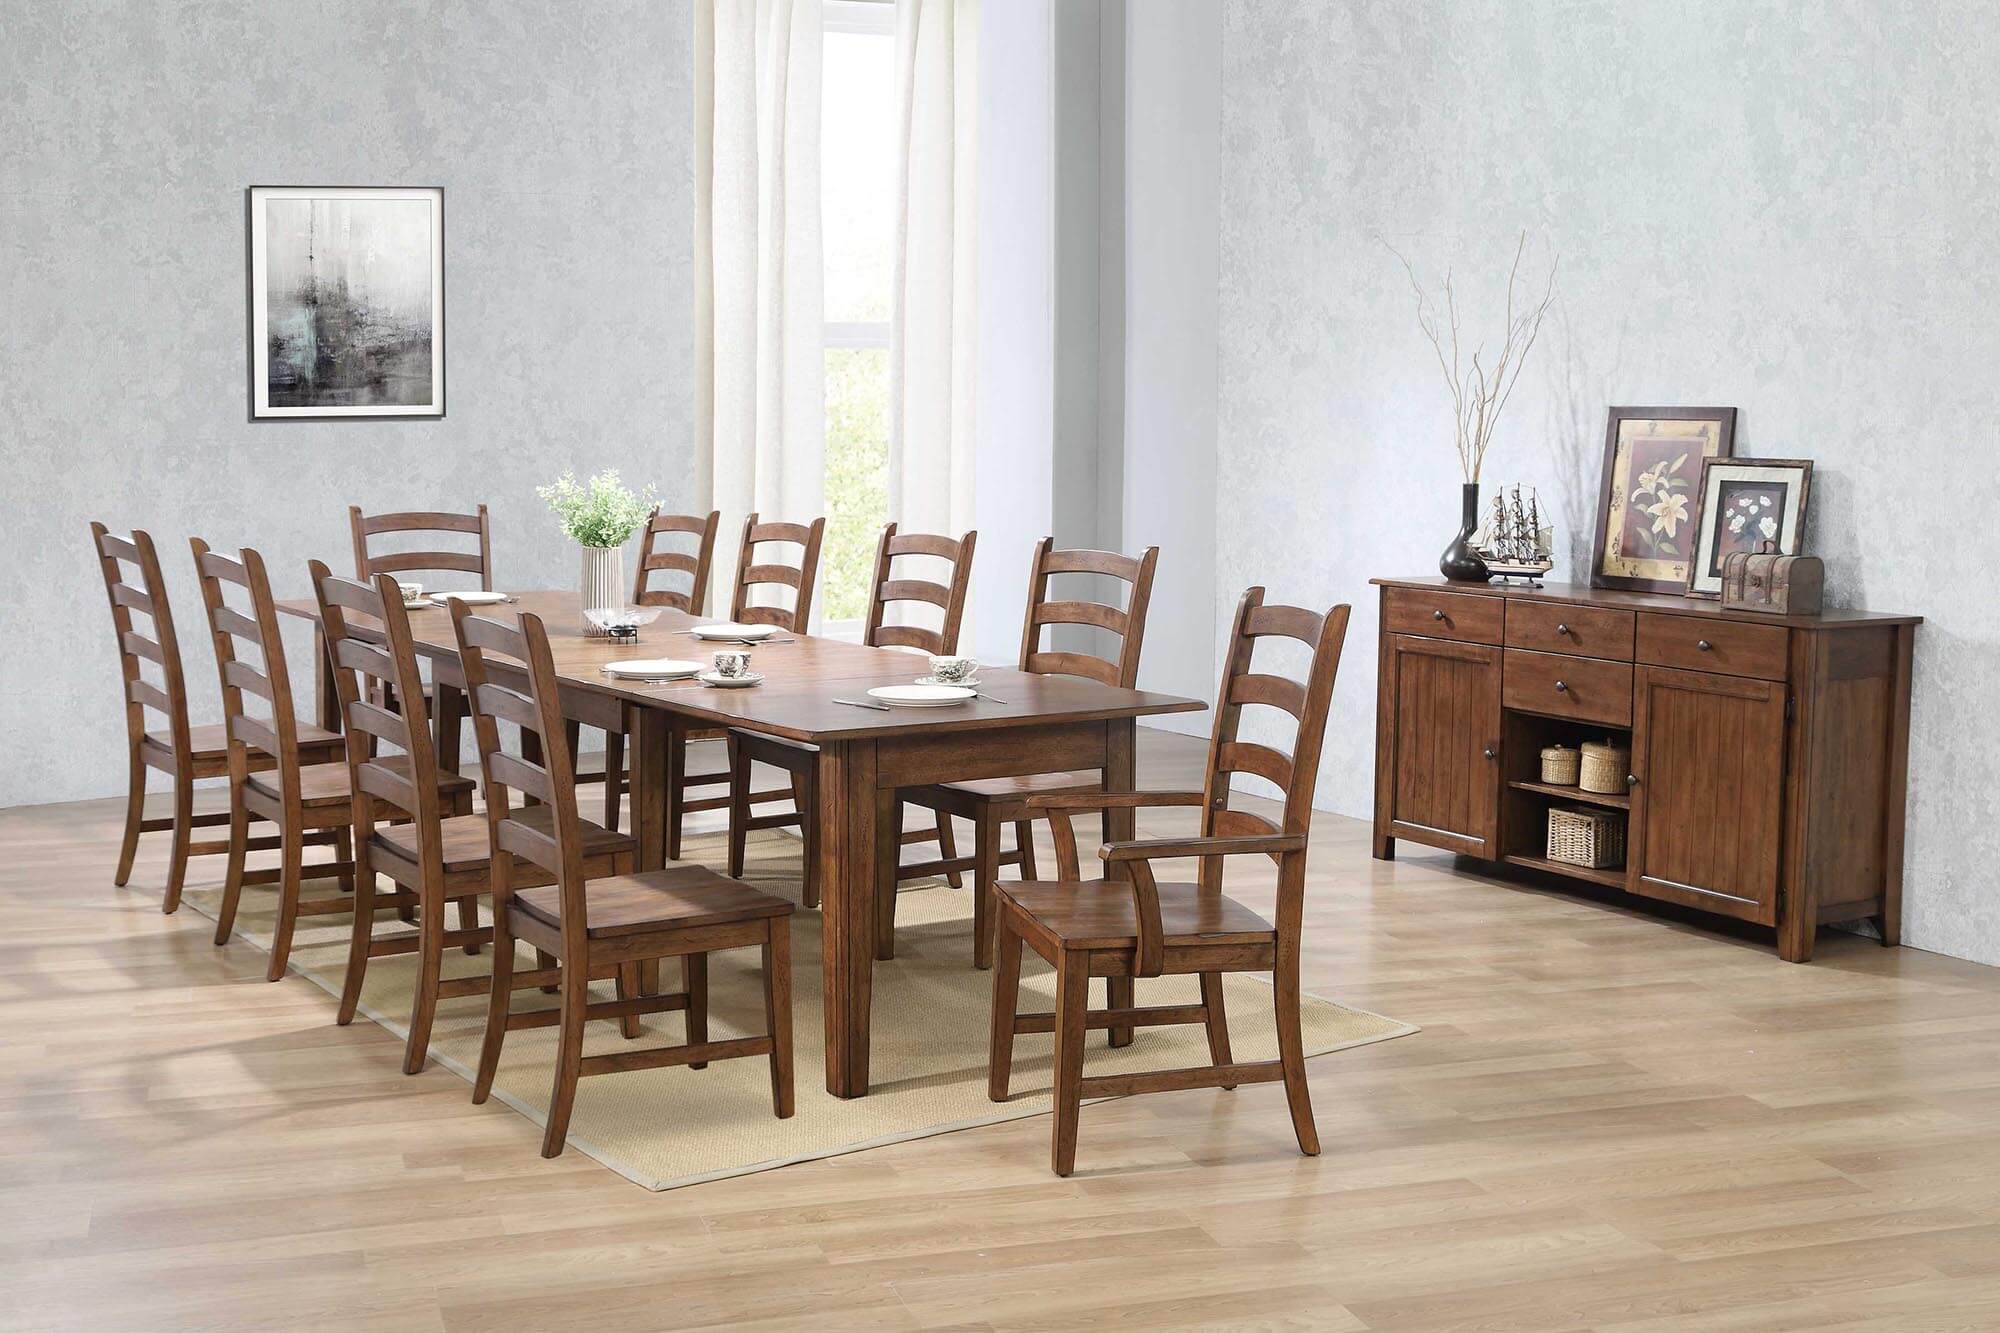 Rectangular Extendable Table Dining Set, 12 Piece Dining Room Table Setup